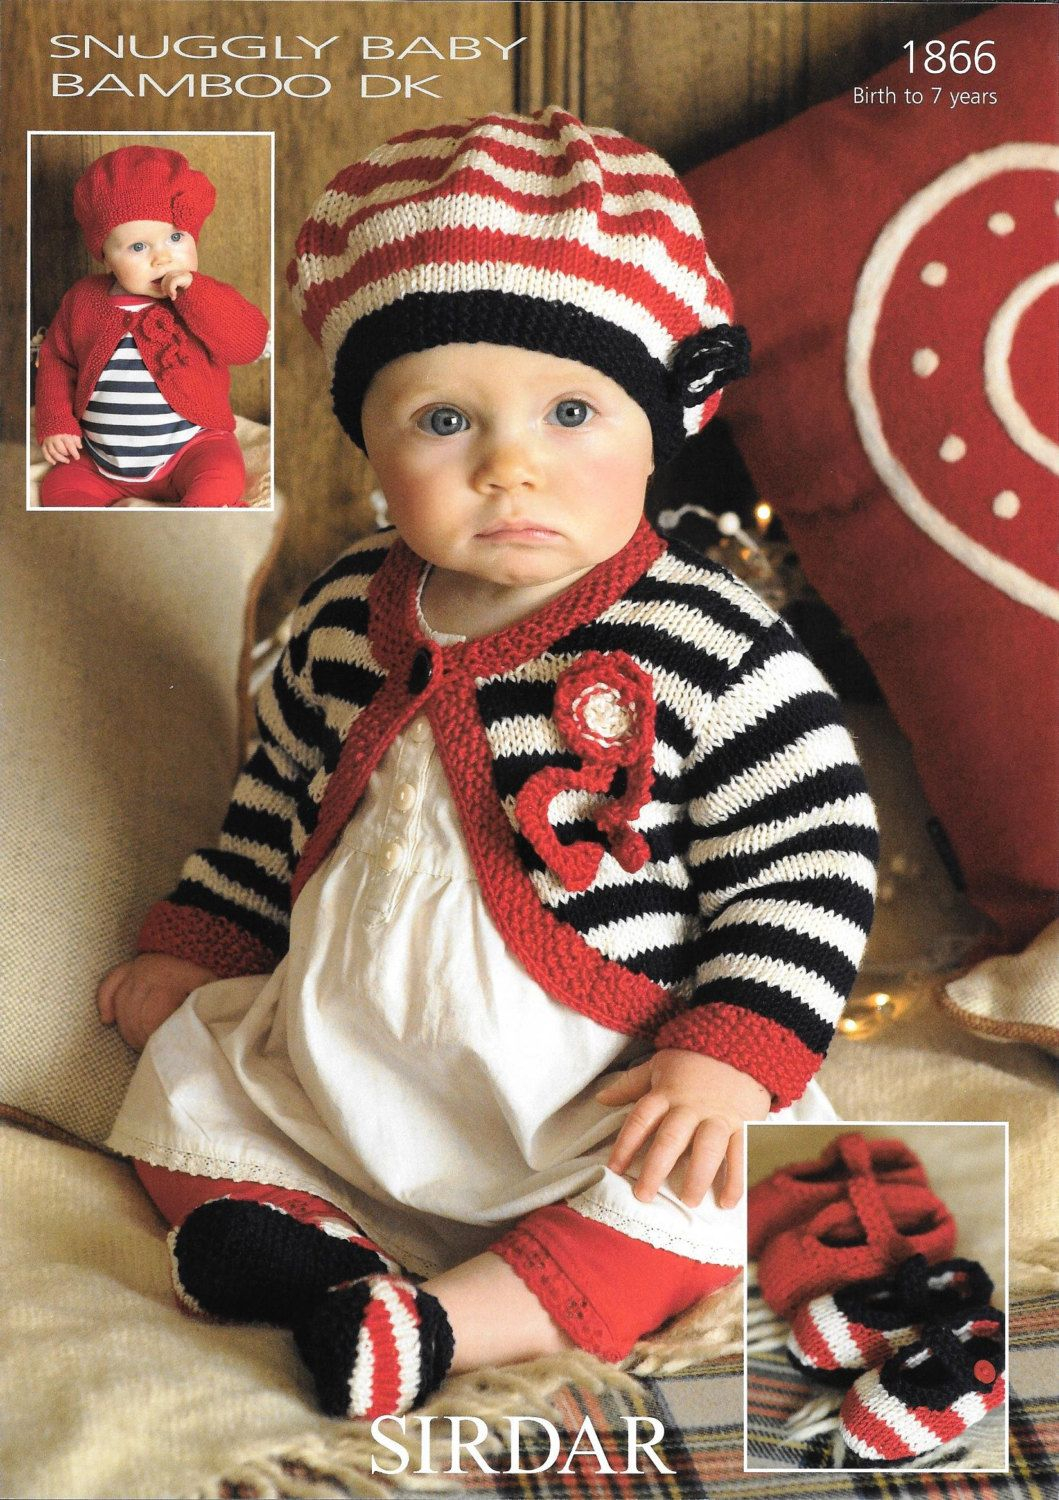 Sirdar Baby Knitting Patterns 1866 Sirdar Snuggly Ba Bamboo Dk Cardigan Beret Shoes Knitting Pattern To Fit 0 To 7 Years